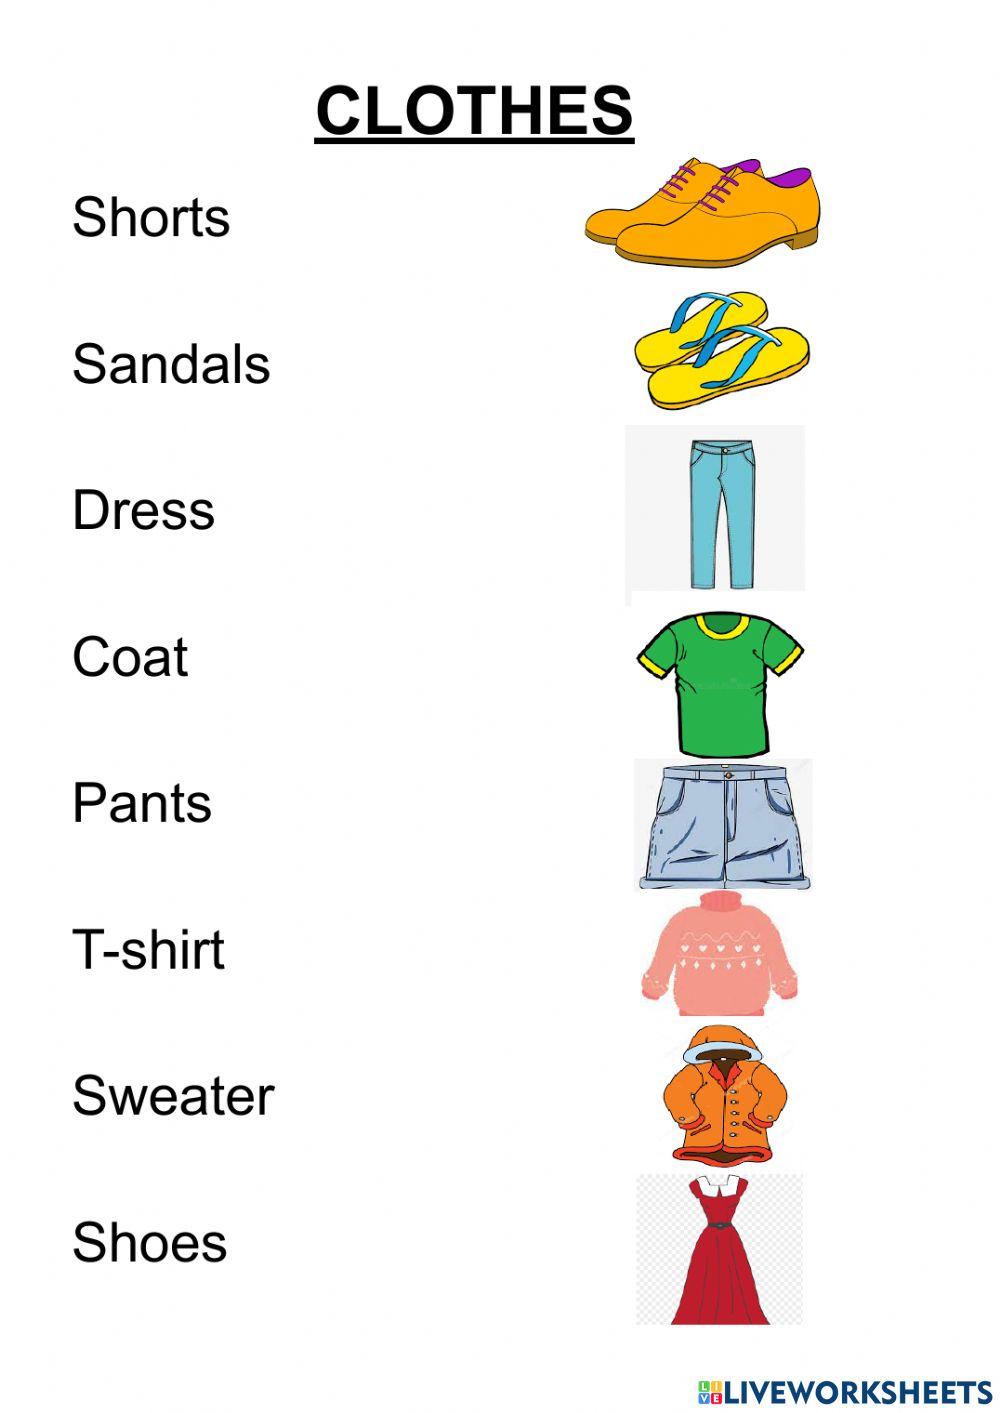 Clothes online exercise for 2 | Live Worksheets